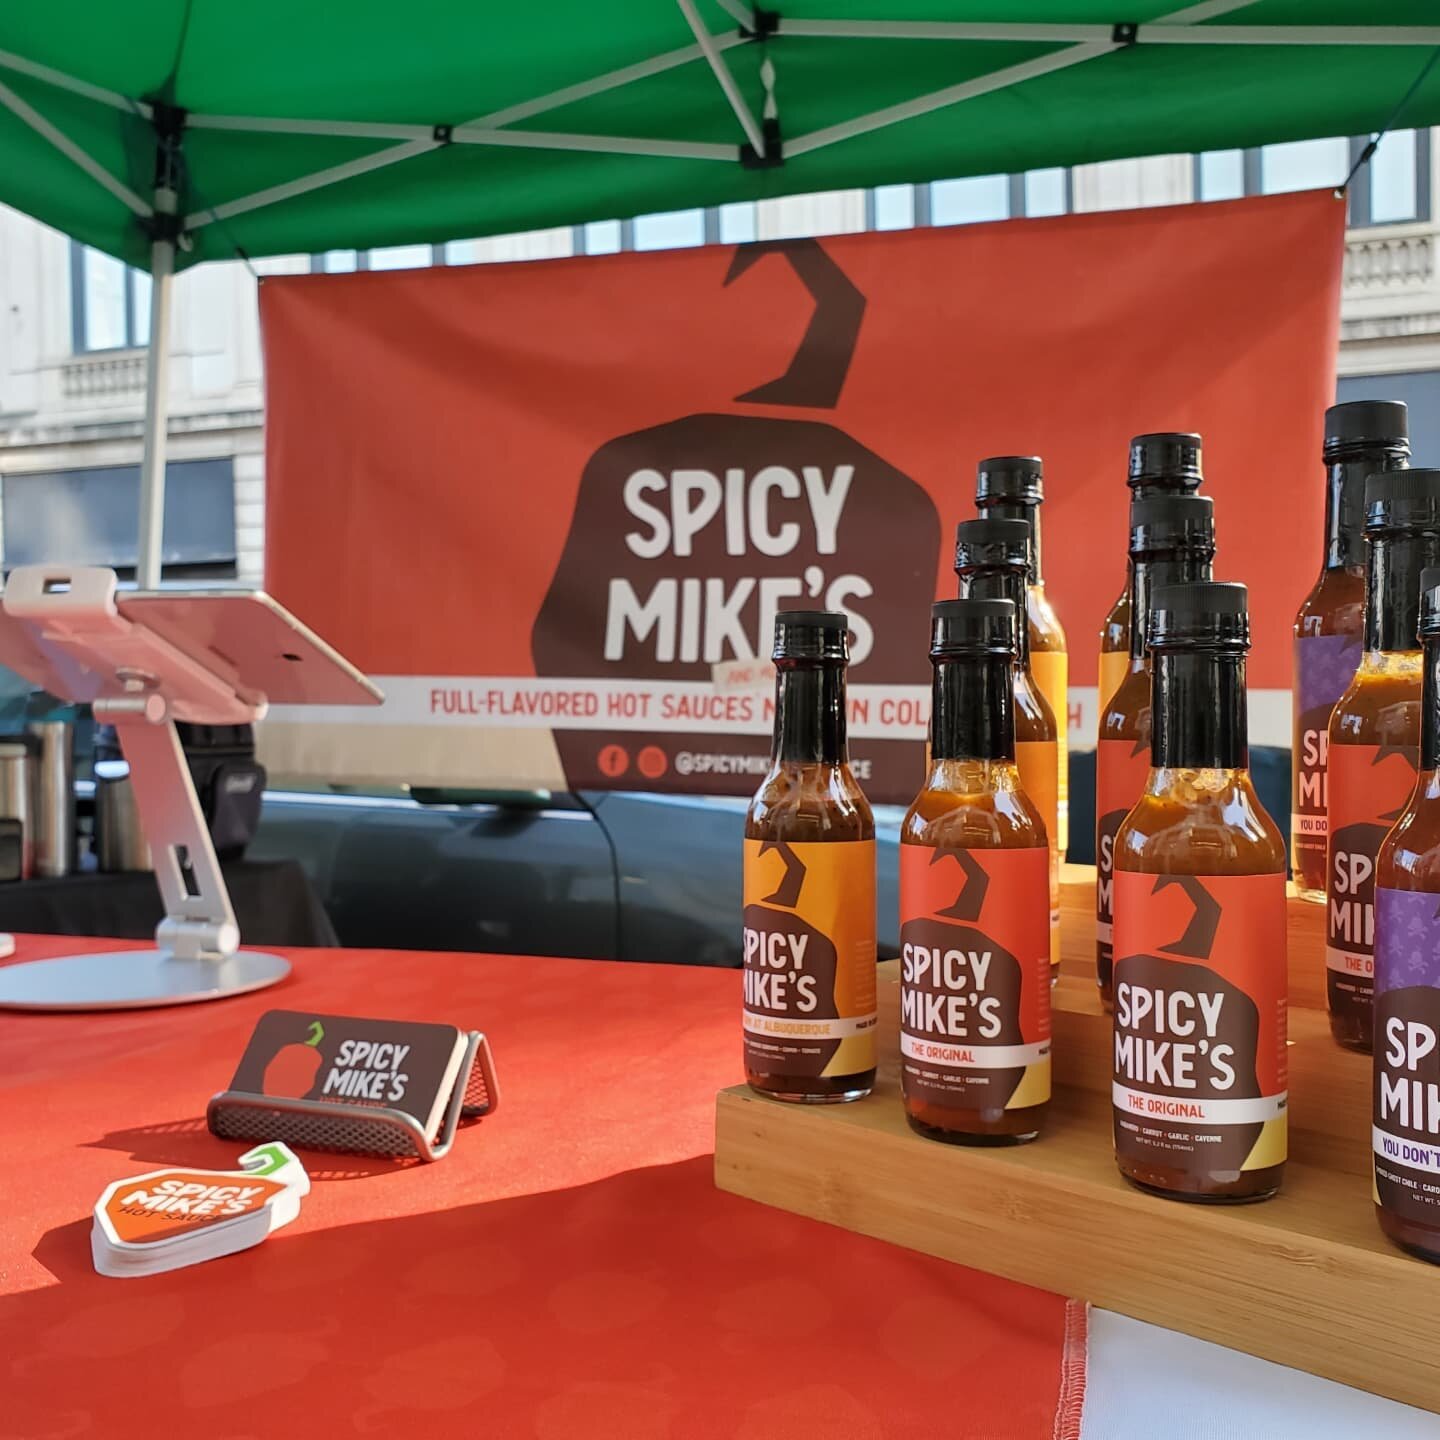 It's our last day downtown at the Pearl Market - come stock up!

#farmersmarket #columbusfood #eat614 #eatlocal #smallbatch #hotsauce #crafthotsauce